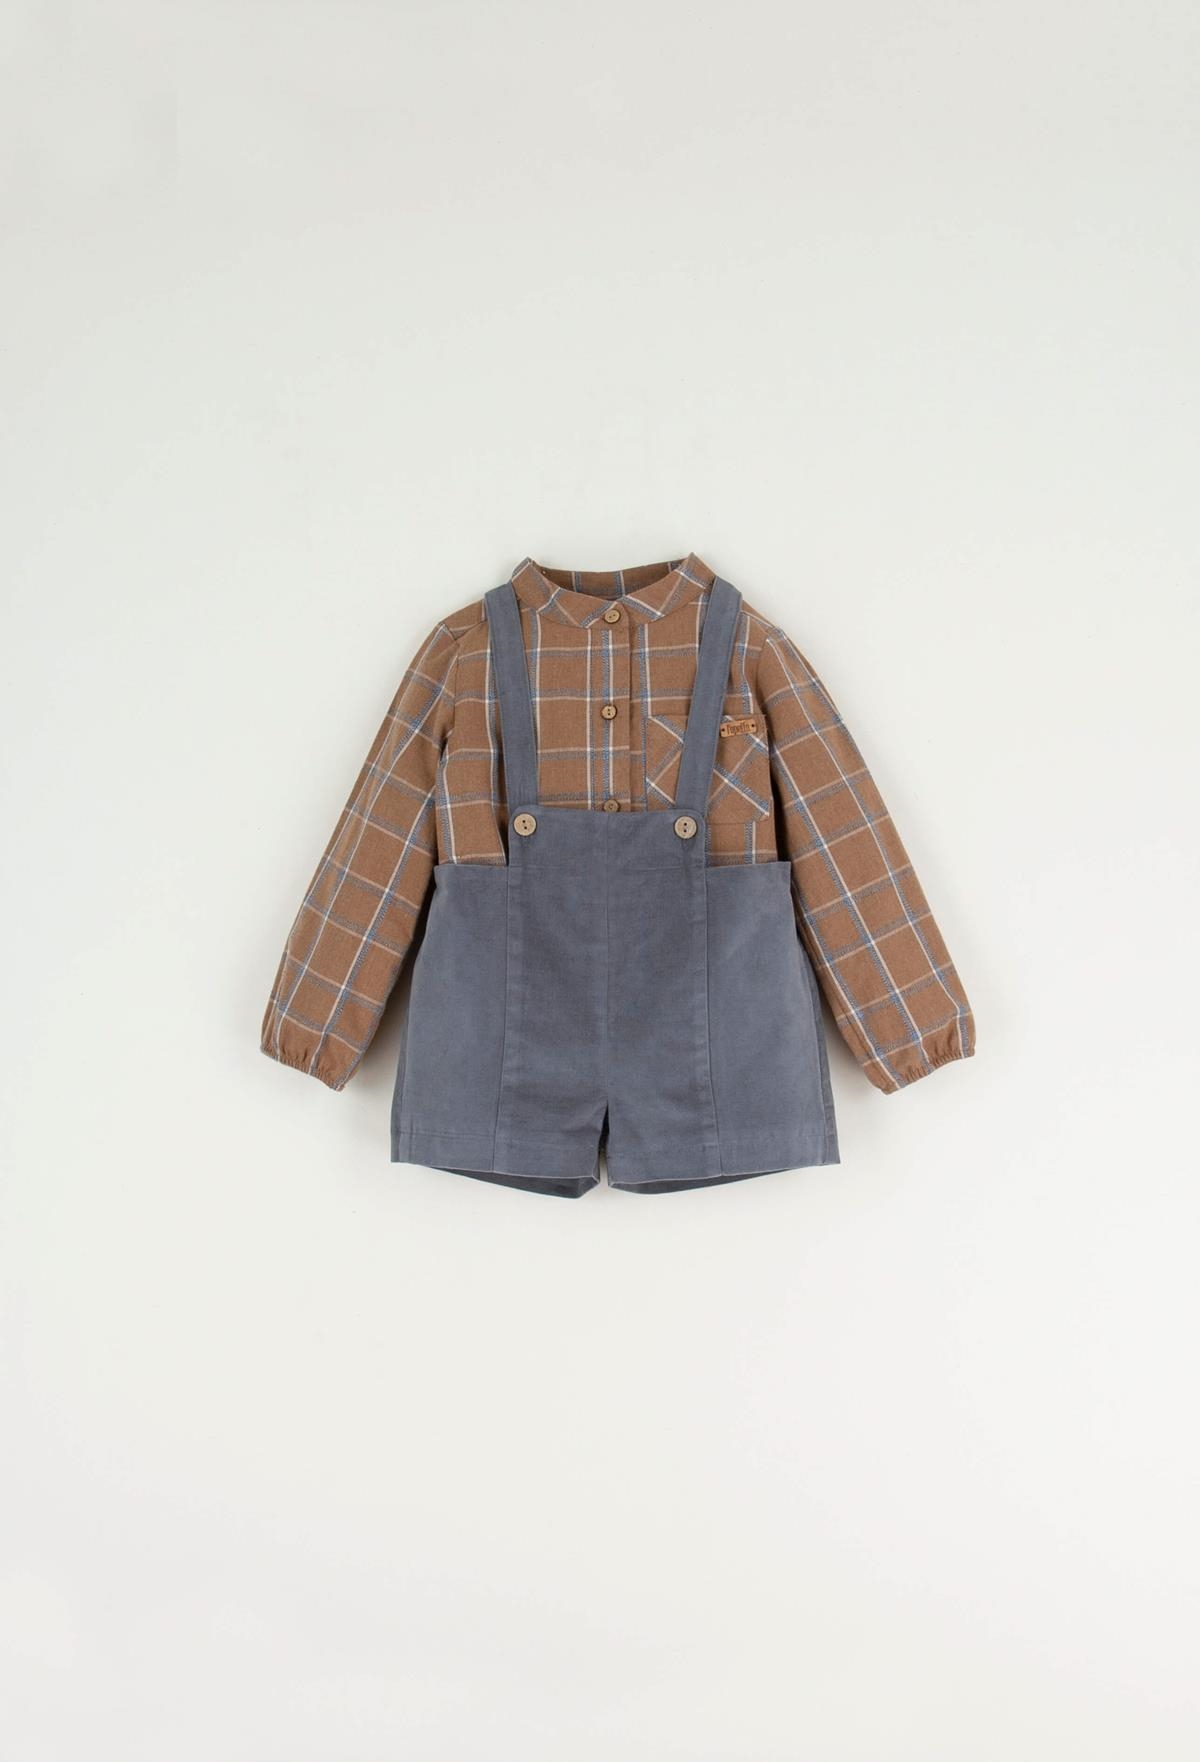 Mod.6.2 Grey dungarees with crossover straps | AW22.23 Mod.6.2 Grey dungarees with crossover straps